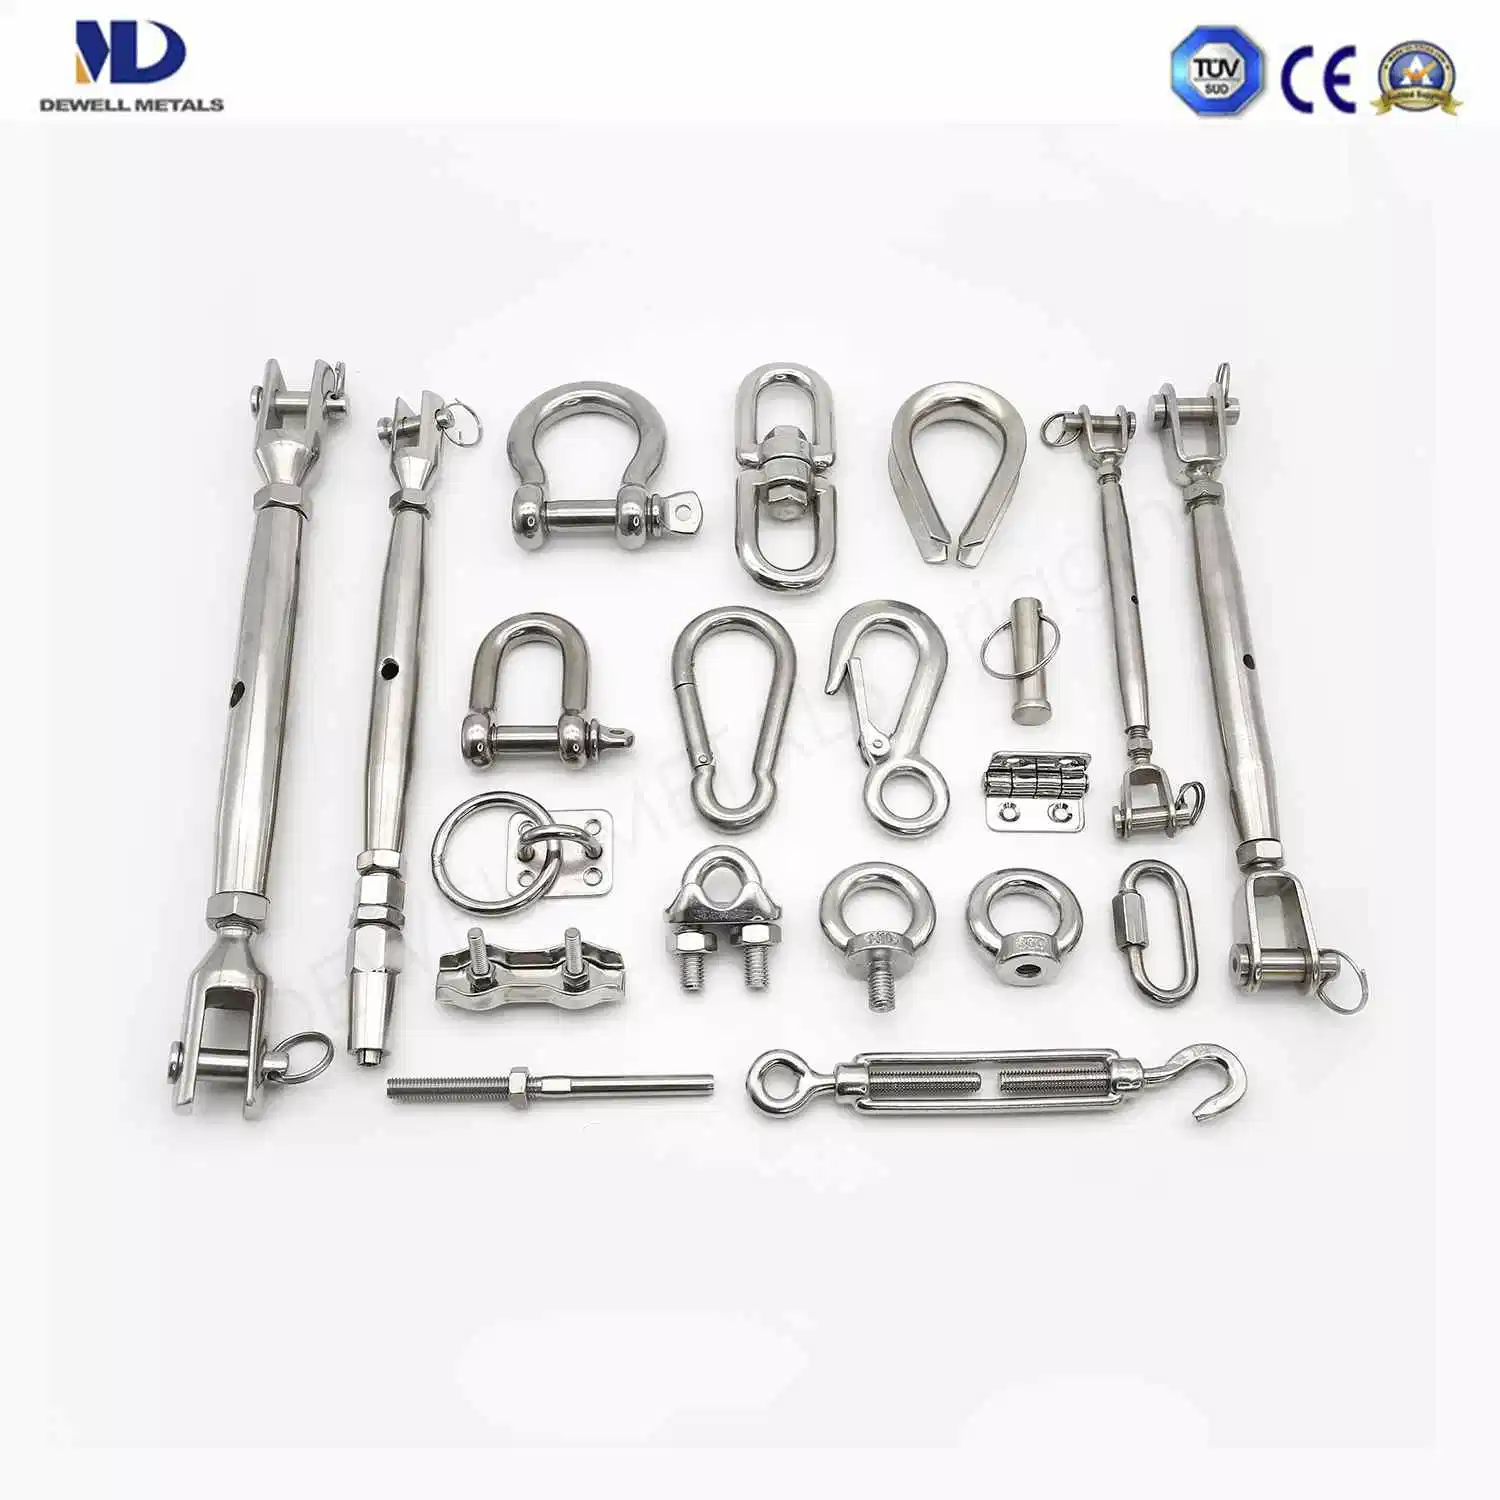 Rigging Shackles/Wire Rope Clips/Turnbuckles/Hooks/Thimbles/Connecting Link/Master Link/Load Binder/Quick Link/Snap Hook/Link Chains/Terminals Marine Hardware